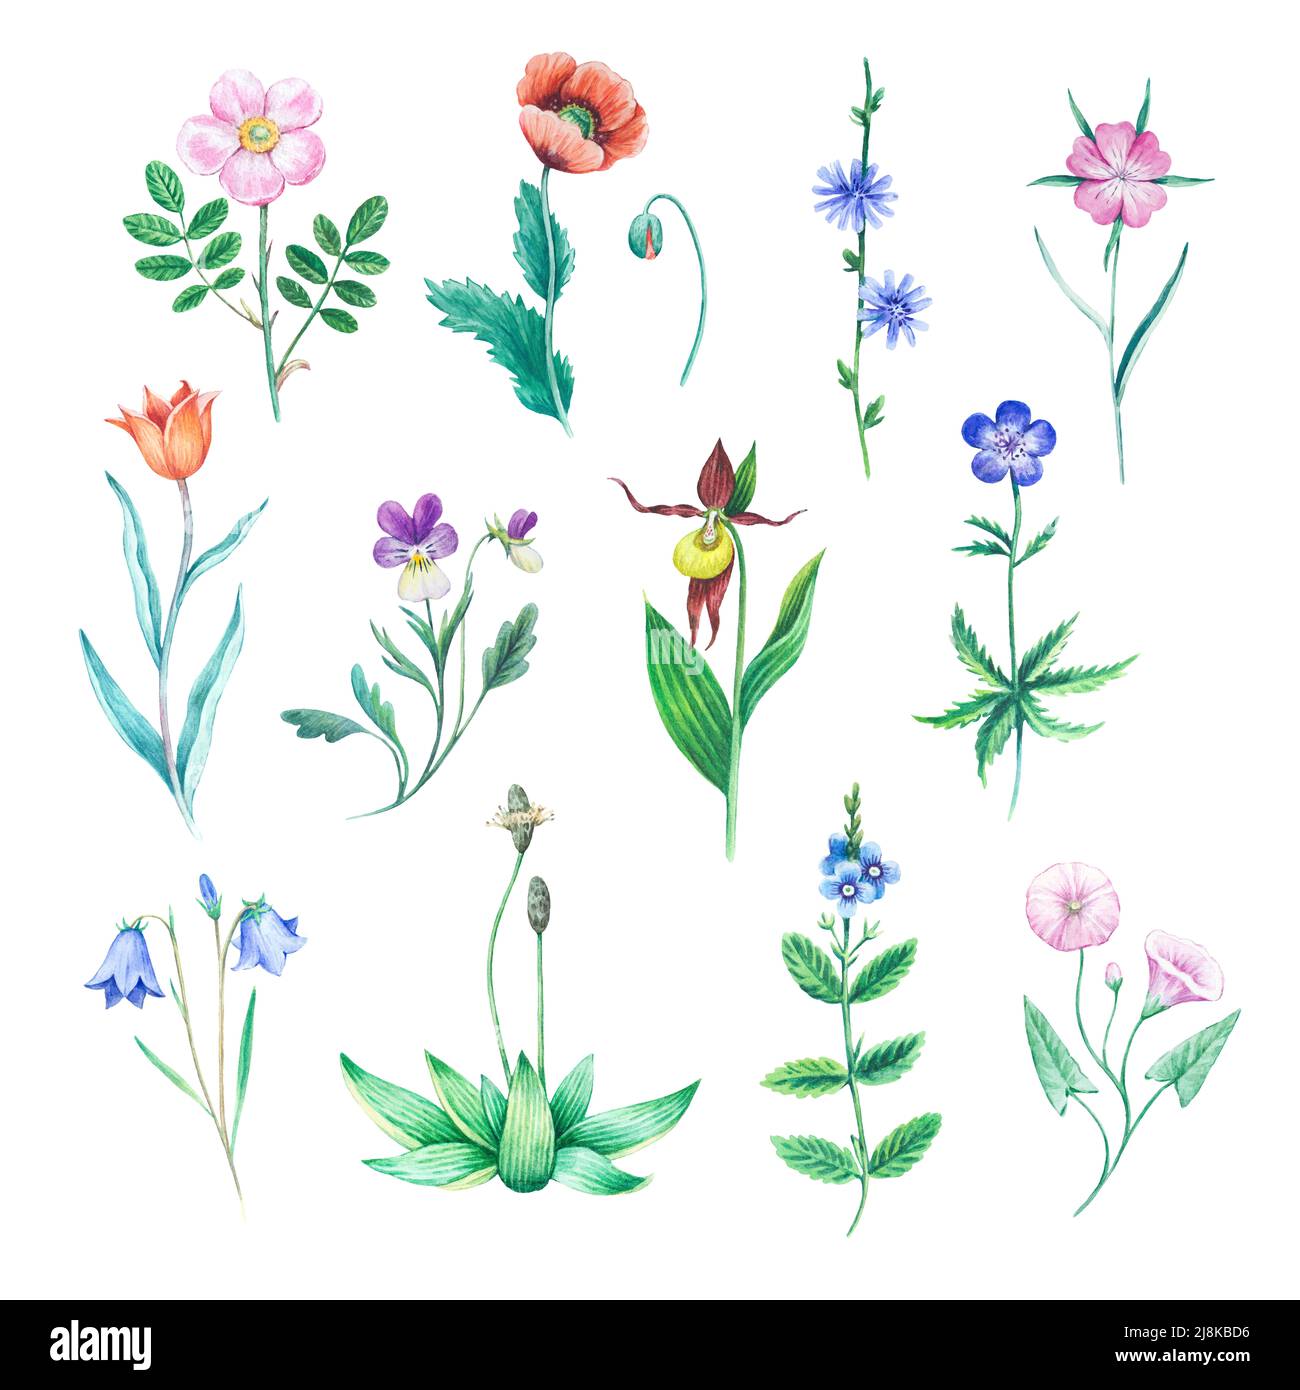 Detailed realistic watercolor botanical illustration. Different meadow cute flowers isolated on white background. Clip art of wild flowers. Stock Photo